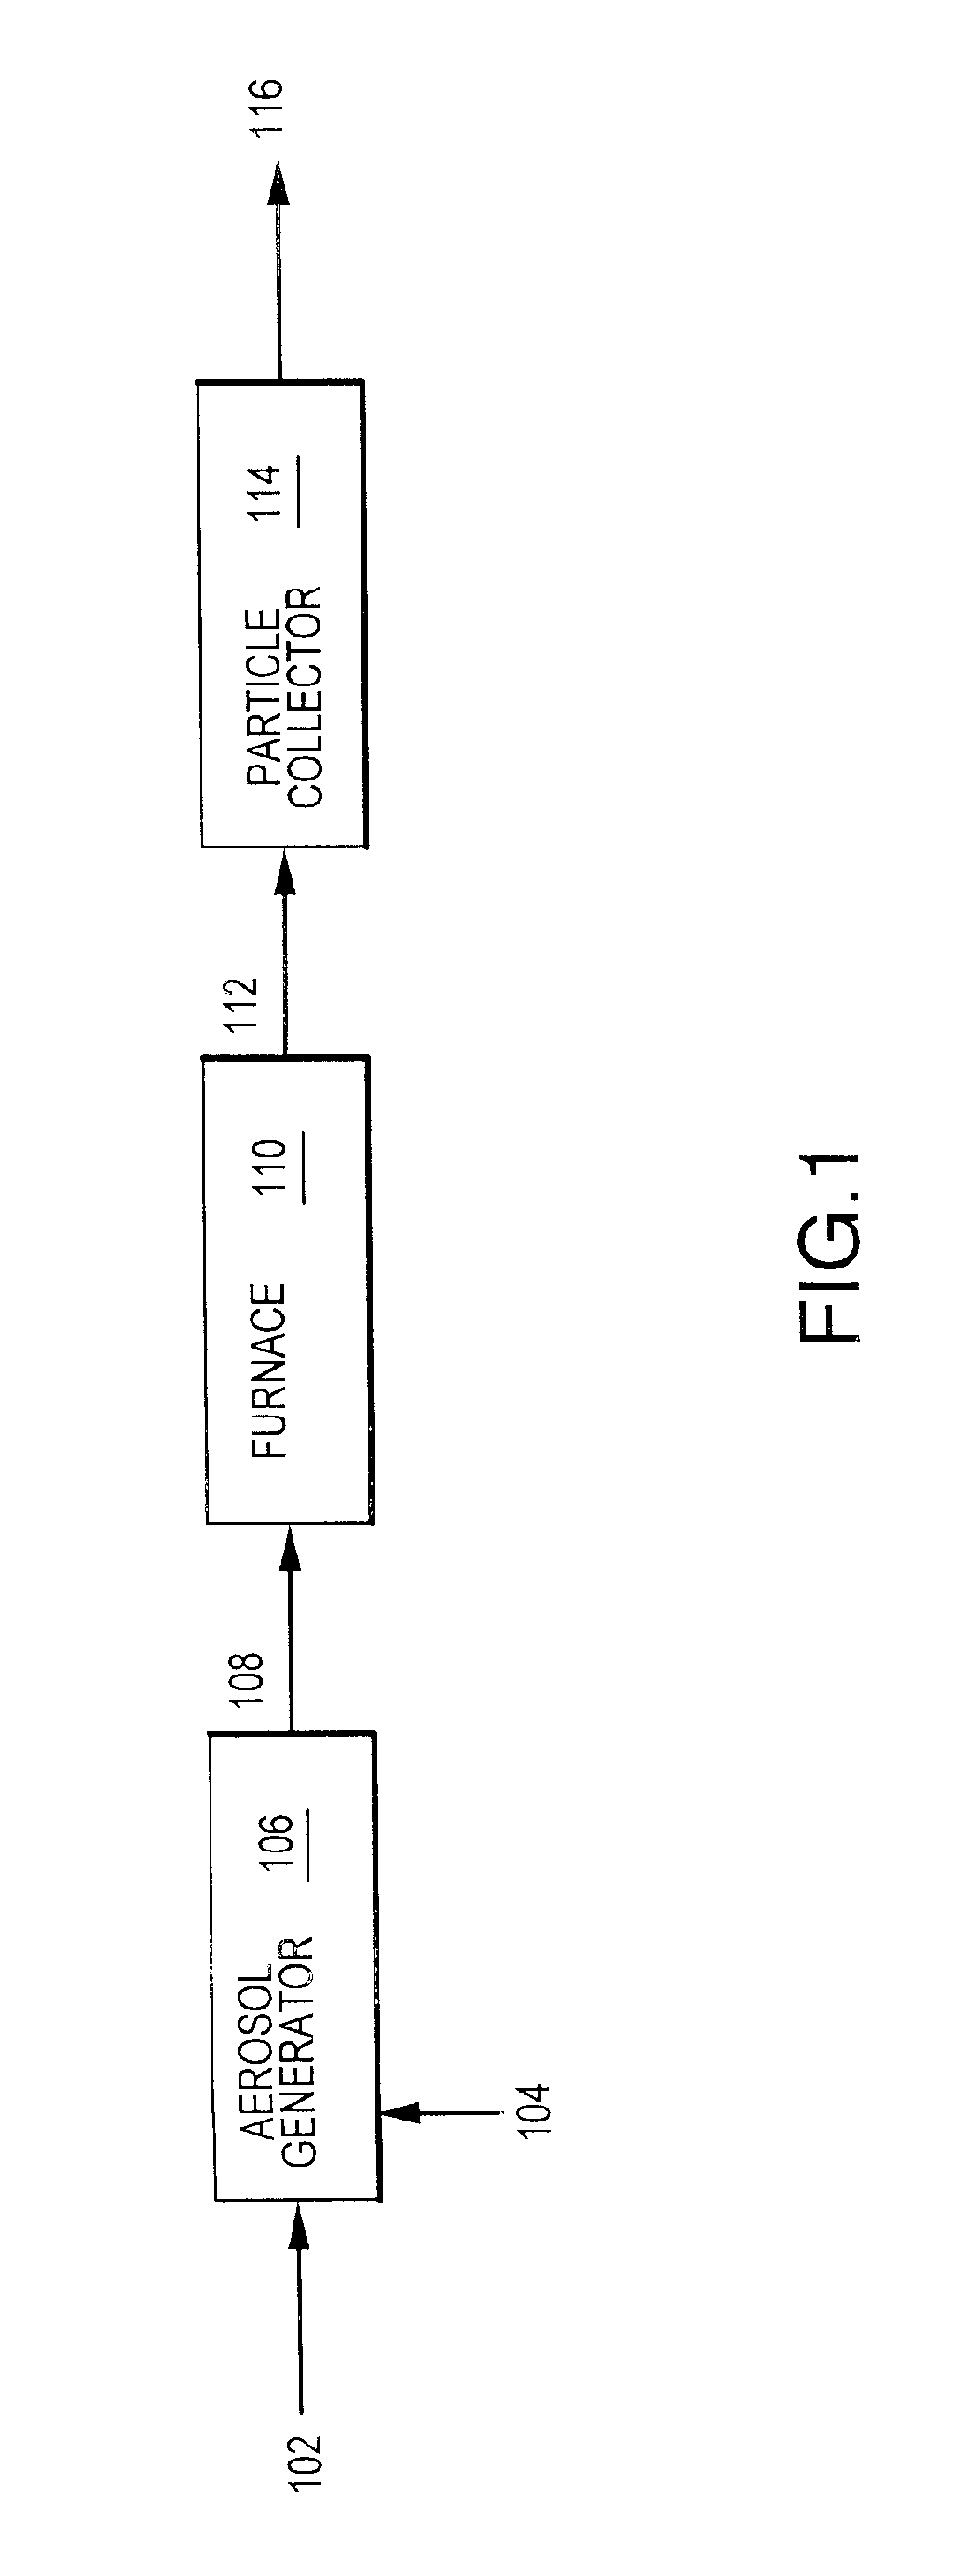 Coated nickel-containing powders, methods and apparatus for producing such powders and devices fabricated from same